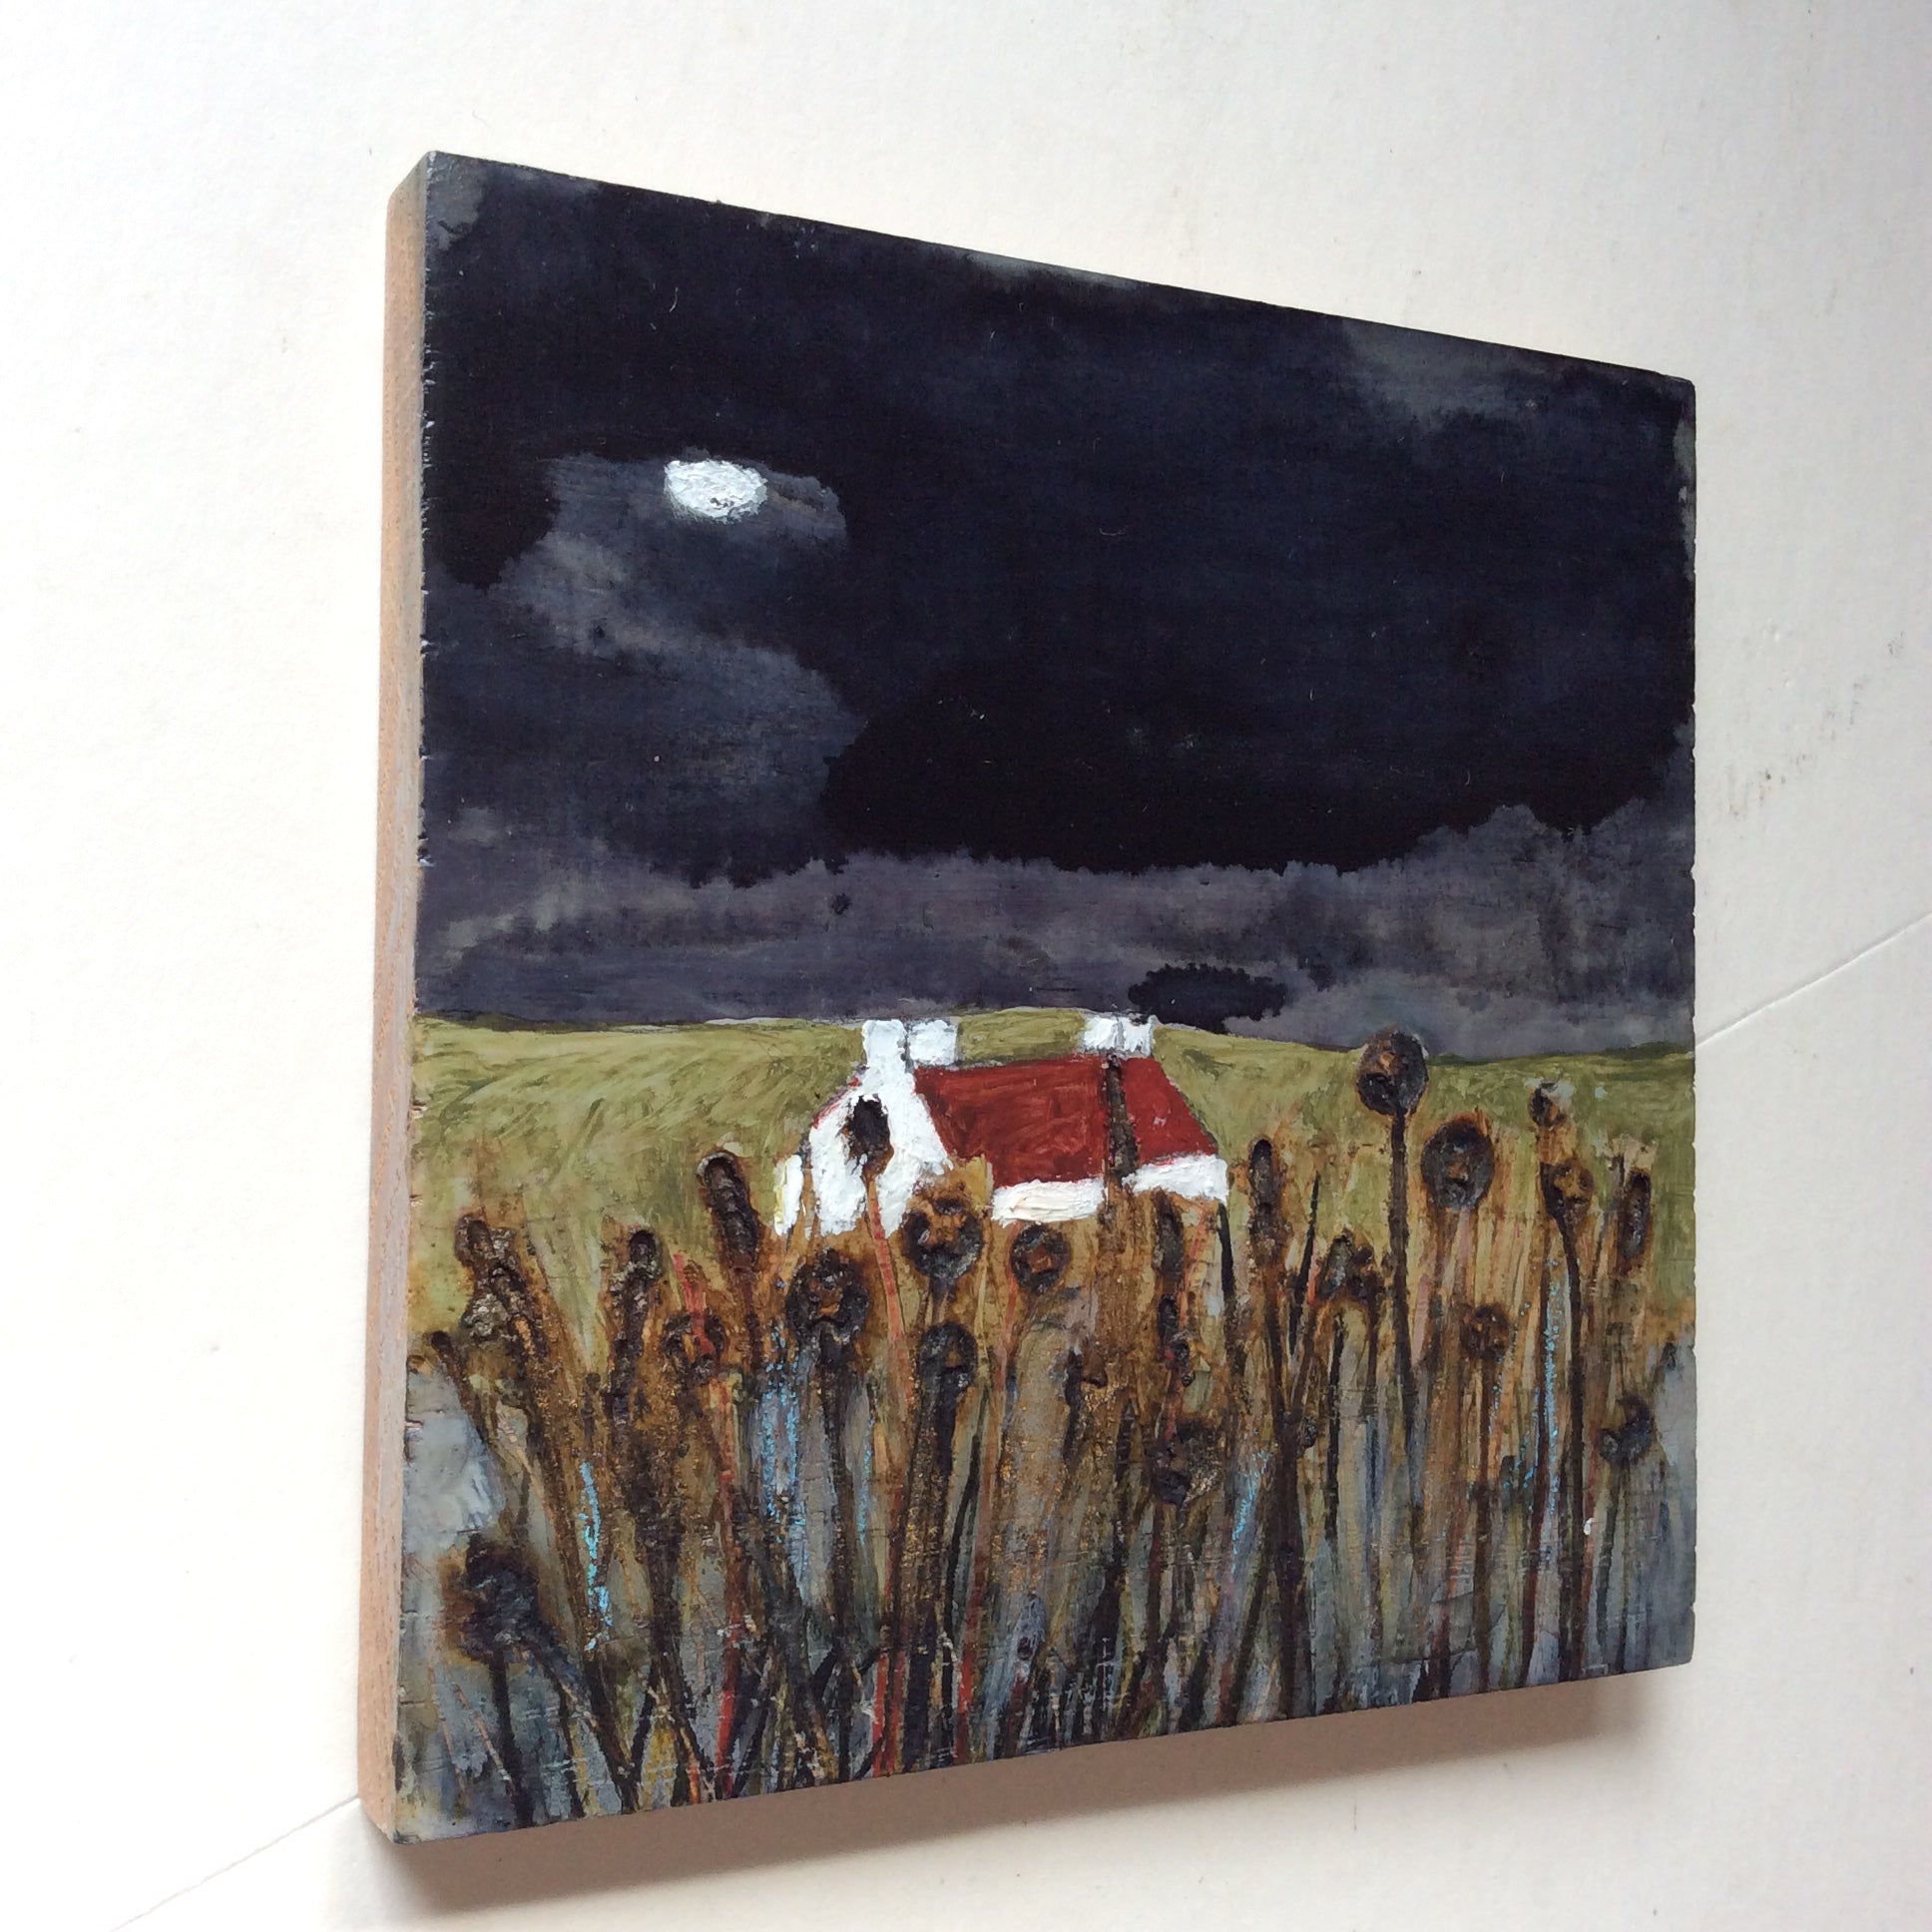 Mixed Media Art on wood By Louise O'Hara - "Green fields beyond”